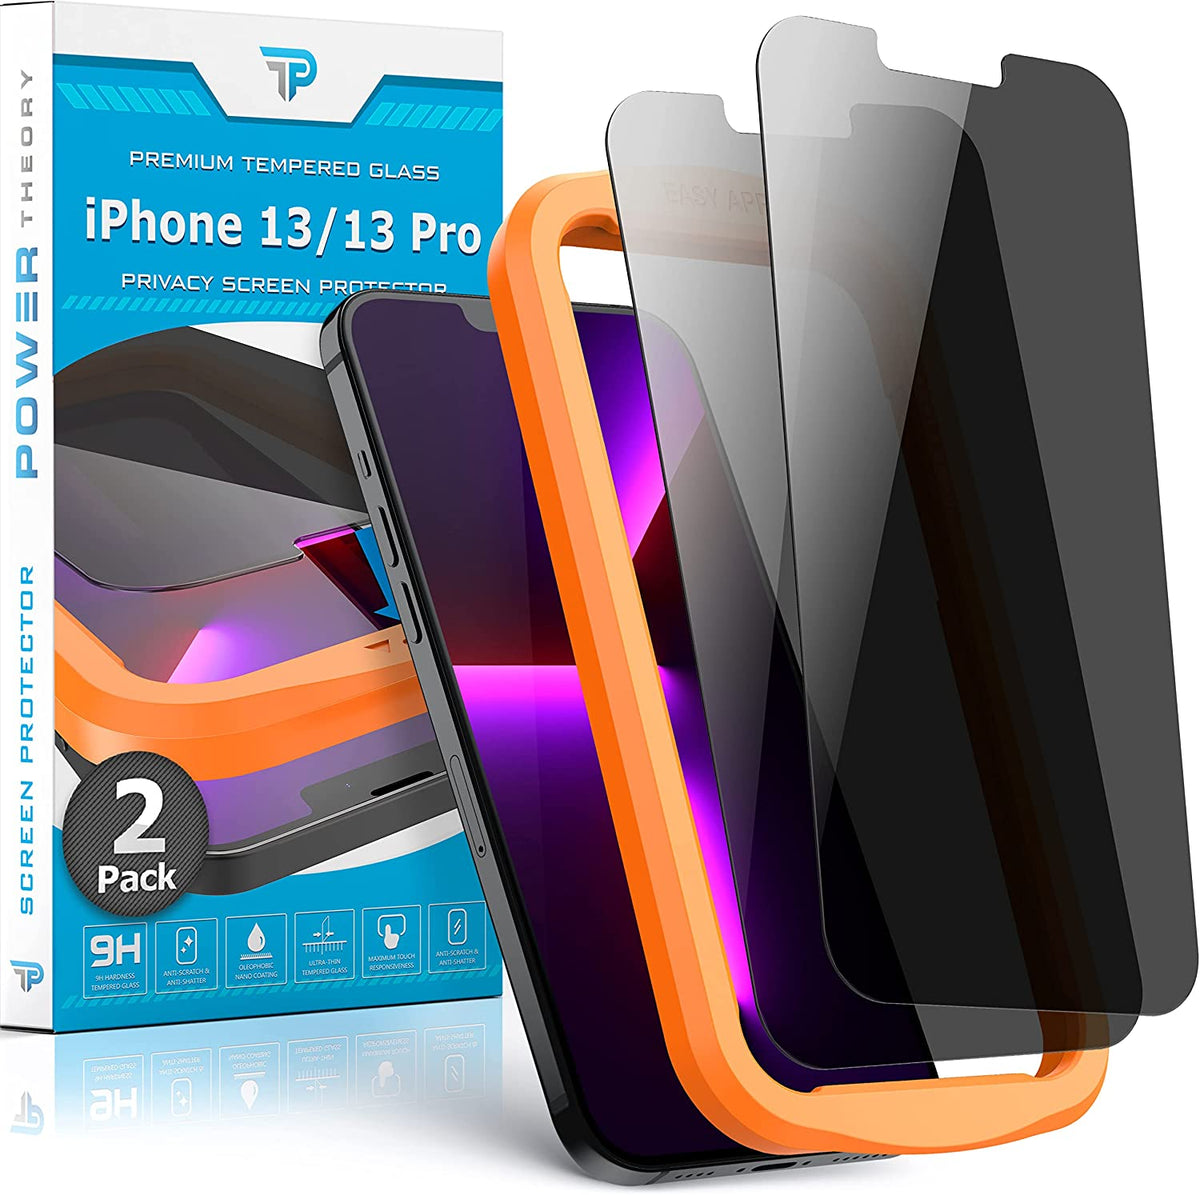 Power Theory Privacy Screen Protector for iPhone 13 Pro/iPhone 13 Tempered Glass [2-Pack] Anti-Spy protection with Easy Install Kit 2022 Cover